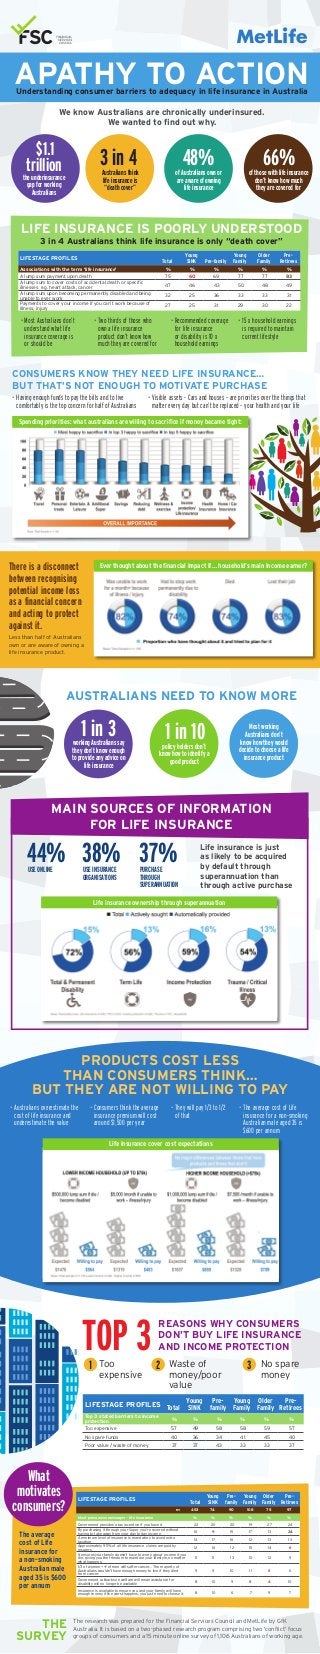 Spending priorities: what australians are willing to sacrifice if money became tight:
Life insurance ownership through superannuation
Life insurance cover cost expectations
LIFESTAGE PROFILES Total
Young
SINK
Pre-
family
Young
Family
Older
Family
Pre-
Retirees
Top 3 stated barriers to income
protection % % % % % %
Too expensive 57 49 58 58 59 57
No spare funds 40 36 34 41 45 40
Poor value / waste of money 37 37 43 33 33 37
APATHY TO ACTIONUnderstanding consumer barriers to adequacy in life insurance in Australia
We know Australians are chronically underinsured.
We wanted to find out why.
3 in 4 Australians think life insurance is only “death cover”
Life insurance is just
as likely to be acquired
by default through
superannuation than
through active purchase
LIFE INSURANCE IS POORLY UNDERSTOOD
MAIN SOURCES OF INFORMATION
FOR LIFE INSURANCE
PRODUCTS COST LESS
THAN CONSUMERS THINK…
BUT THEY ARE NOT WILLING TO PAY
CONSUMERS KNOW THEY NEED LIFE INSURANCE…
BUT THAT’S NOT ENOUGH TO MOTIVATE PURCHASE
AUSTRALIANS NEED TO KNOW MORE
Australians think
life insurance is
“death cover”
of Australians own or
are aware of owning
life insurance
of those with life insurance
don’t know how much
they are covered for
the underinsurance
gap for working
Australians
3 in 4 48% 66%$1.1
trillion
working Australians say
they don’t know enough
to provide any advice on
life insurance
policy holders don’t
know how to identify a
good product
Most working
Australians don’t
know how they would
decide to choose a life
insurance product
1 in 3
USE ONLINE
44% USE INSURANCE
ORGANISATIONS
38% PURCHASE
THROUGH
SUPERANNUATION
37%
1 in 10
• Most Australians don’t
understand what life
insurance coverage is
or should be
• Having enough funds to pay the bills and to live
comfortably is the top concern for half of Australians
• Visible assets - Cars and houses – are priorities over the things that
matter every day but can’t be replaced – your health and your life
• Two thirds of those who
own a life insurance
product don’t know how
much they are covered for
• Recommended coverage
for life insurance
or disability is 10 x
household earnings
• 15 x household earnings
is required to maintain
current lifestyle
LIFESTAGE PROFILES Total
Young
SINK Pre-family
Young
Family
Older
Family
Pre-
Retirees
Associations with the term ‘life insurance’ % % % % % %
A lump sum payment upon death 75 60 69 77 77 83
A lump sum to cover costs of accidental death or specific
illnesses e.g. heart attack, cancer
47 46 43 50 48 49
A lump sum upon becoming permanently disabled and being
unable to ever work
32 25 36 33 33 31
Payments to cover your income if you can’t work because of
illness, injury
27 25 31 29 30 22
Ever thought about the financial impact if… household’s main income earner?There is a disconnect
between recognising
potential income loss
as a financial concern
and acting to protect
against it.
Less than half of Australians
own or are aware of owning a
life insurance product.
• Australians overestimate the
cost of life insurance and
underestimate the value
• Consumers think the average
insurance premium will cost
around $1,500 per year
• They will pay 1/3 to 1/2
of that
• The average cost of Life
insurance for a non-smoking
Australian male aged 35 is
$600 per annum
REASONS WHY CONSUMERS
DON’T BUY LIFE INSURANCE
AND INCOME PROTECTIONTOP 3Too
expensive
1 Waste of
money/poor
value
2 No spare
money
3
What
motivates
consumers?
The average
cost of Life
insurance for
a non-smoking
Australian male
aged 35 is $600
per annum
THE
SURVEY
The research was prepared for the Financial Services Council and MetLife by GfK
Australia. It is based on a two-phased research program comprising two ‘conflict’ focus
groups of consumers and a 15 minute online survey of 1,106 Australians of working age.
LIFESTAGE PROFILES Total
Young
SINK
Pre-
family
Young
Family
Older
Family
Pre-
Retirees
n= 453 74 90 108 75 97
Most persuasive messages - life insurance % % % % % %
Government provides a tax incentive if you have it 22 20 20 19 27 24
By purchasing it through your Super you're covered without
having to take away from your day to day income
16 9 15 17 13 24
A minimum level of insurance is mandatory to avoid extra
taxation
14 17 16 12 13 13
Approximately 95% of all life insurance claims are paid by
insurers
12 16 12 15 14 6
It ensures your family doesn’t have to worry about income if you
die, giving you the freedom to maintain your lifestyle, no matter
what happens.
11 11 13 10 12 9
1/3 of women + ¼ of men will suffer cancer… The majority of
Australians wouldn’t have enough money to live if they died
from cancer.
9 9 10 11 8 6
Government cutbacks on welfare will mean assistance for
disability will no longer be available
8 10 9 8 4 10
Insurance is available to ensure you and your family will have
enough money if the worst happens; you just need to choose it.
8 10 6 7 9 7
 